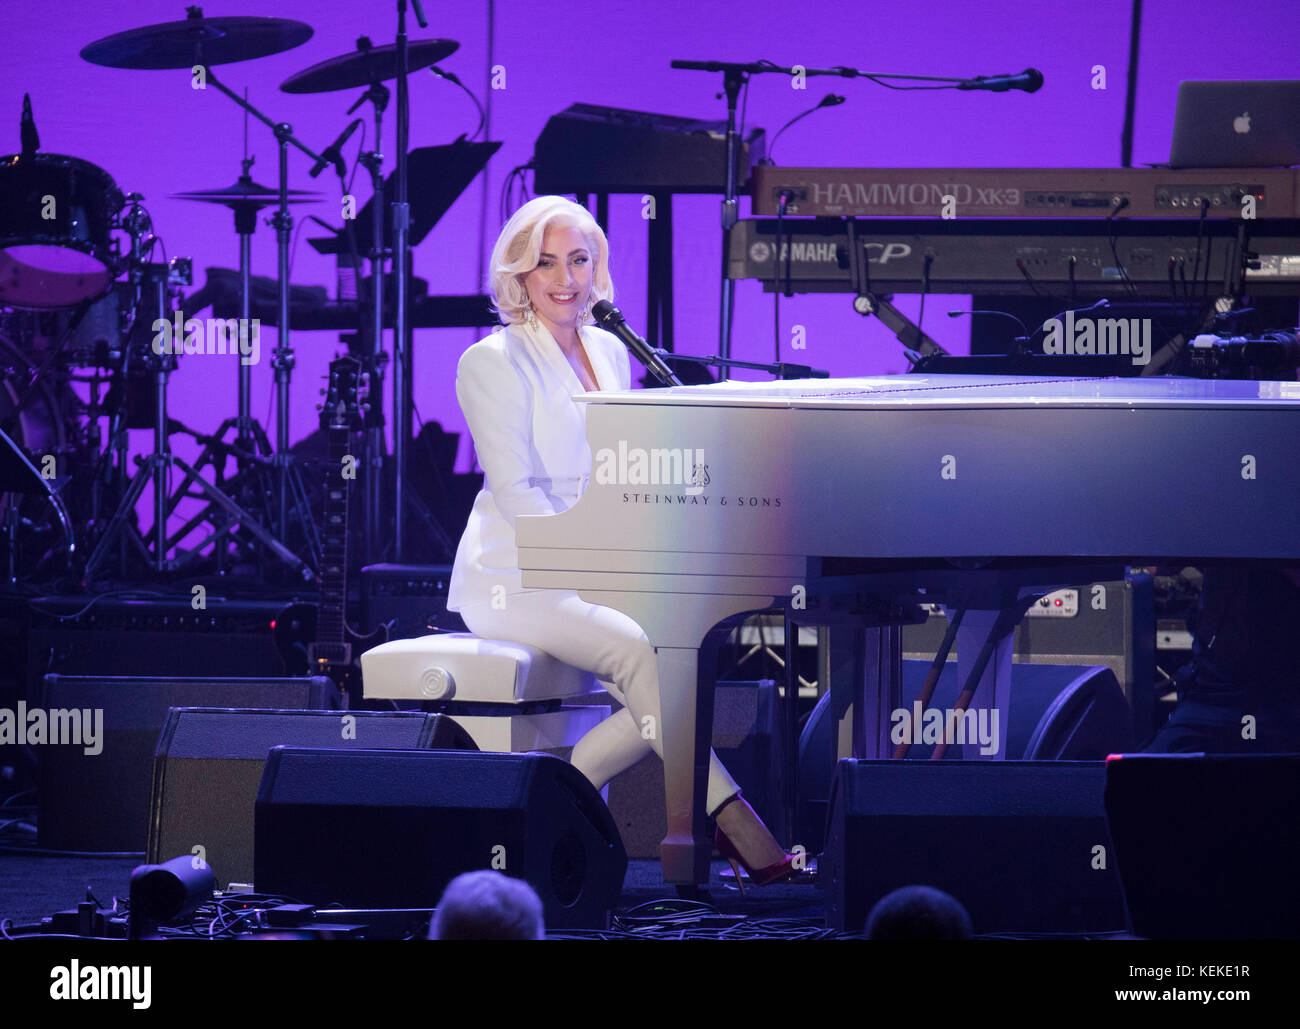 College Station, Texas USA Oct. 21, 2017: Singer Lady Gaga performs at a white grand piano on stage at the One America Appeal concert and fund raiser for hurricane and storm relief. Former U.S. presidents Jimmy Carter, George H.W. Bush, George W. Bush, Bill Clinton and Barack Obama hosted the event, held at Reed Arena on the campus of Texas A&M University. Credit: Bob Daemmrich/Alamy Live News Stock Photo